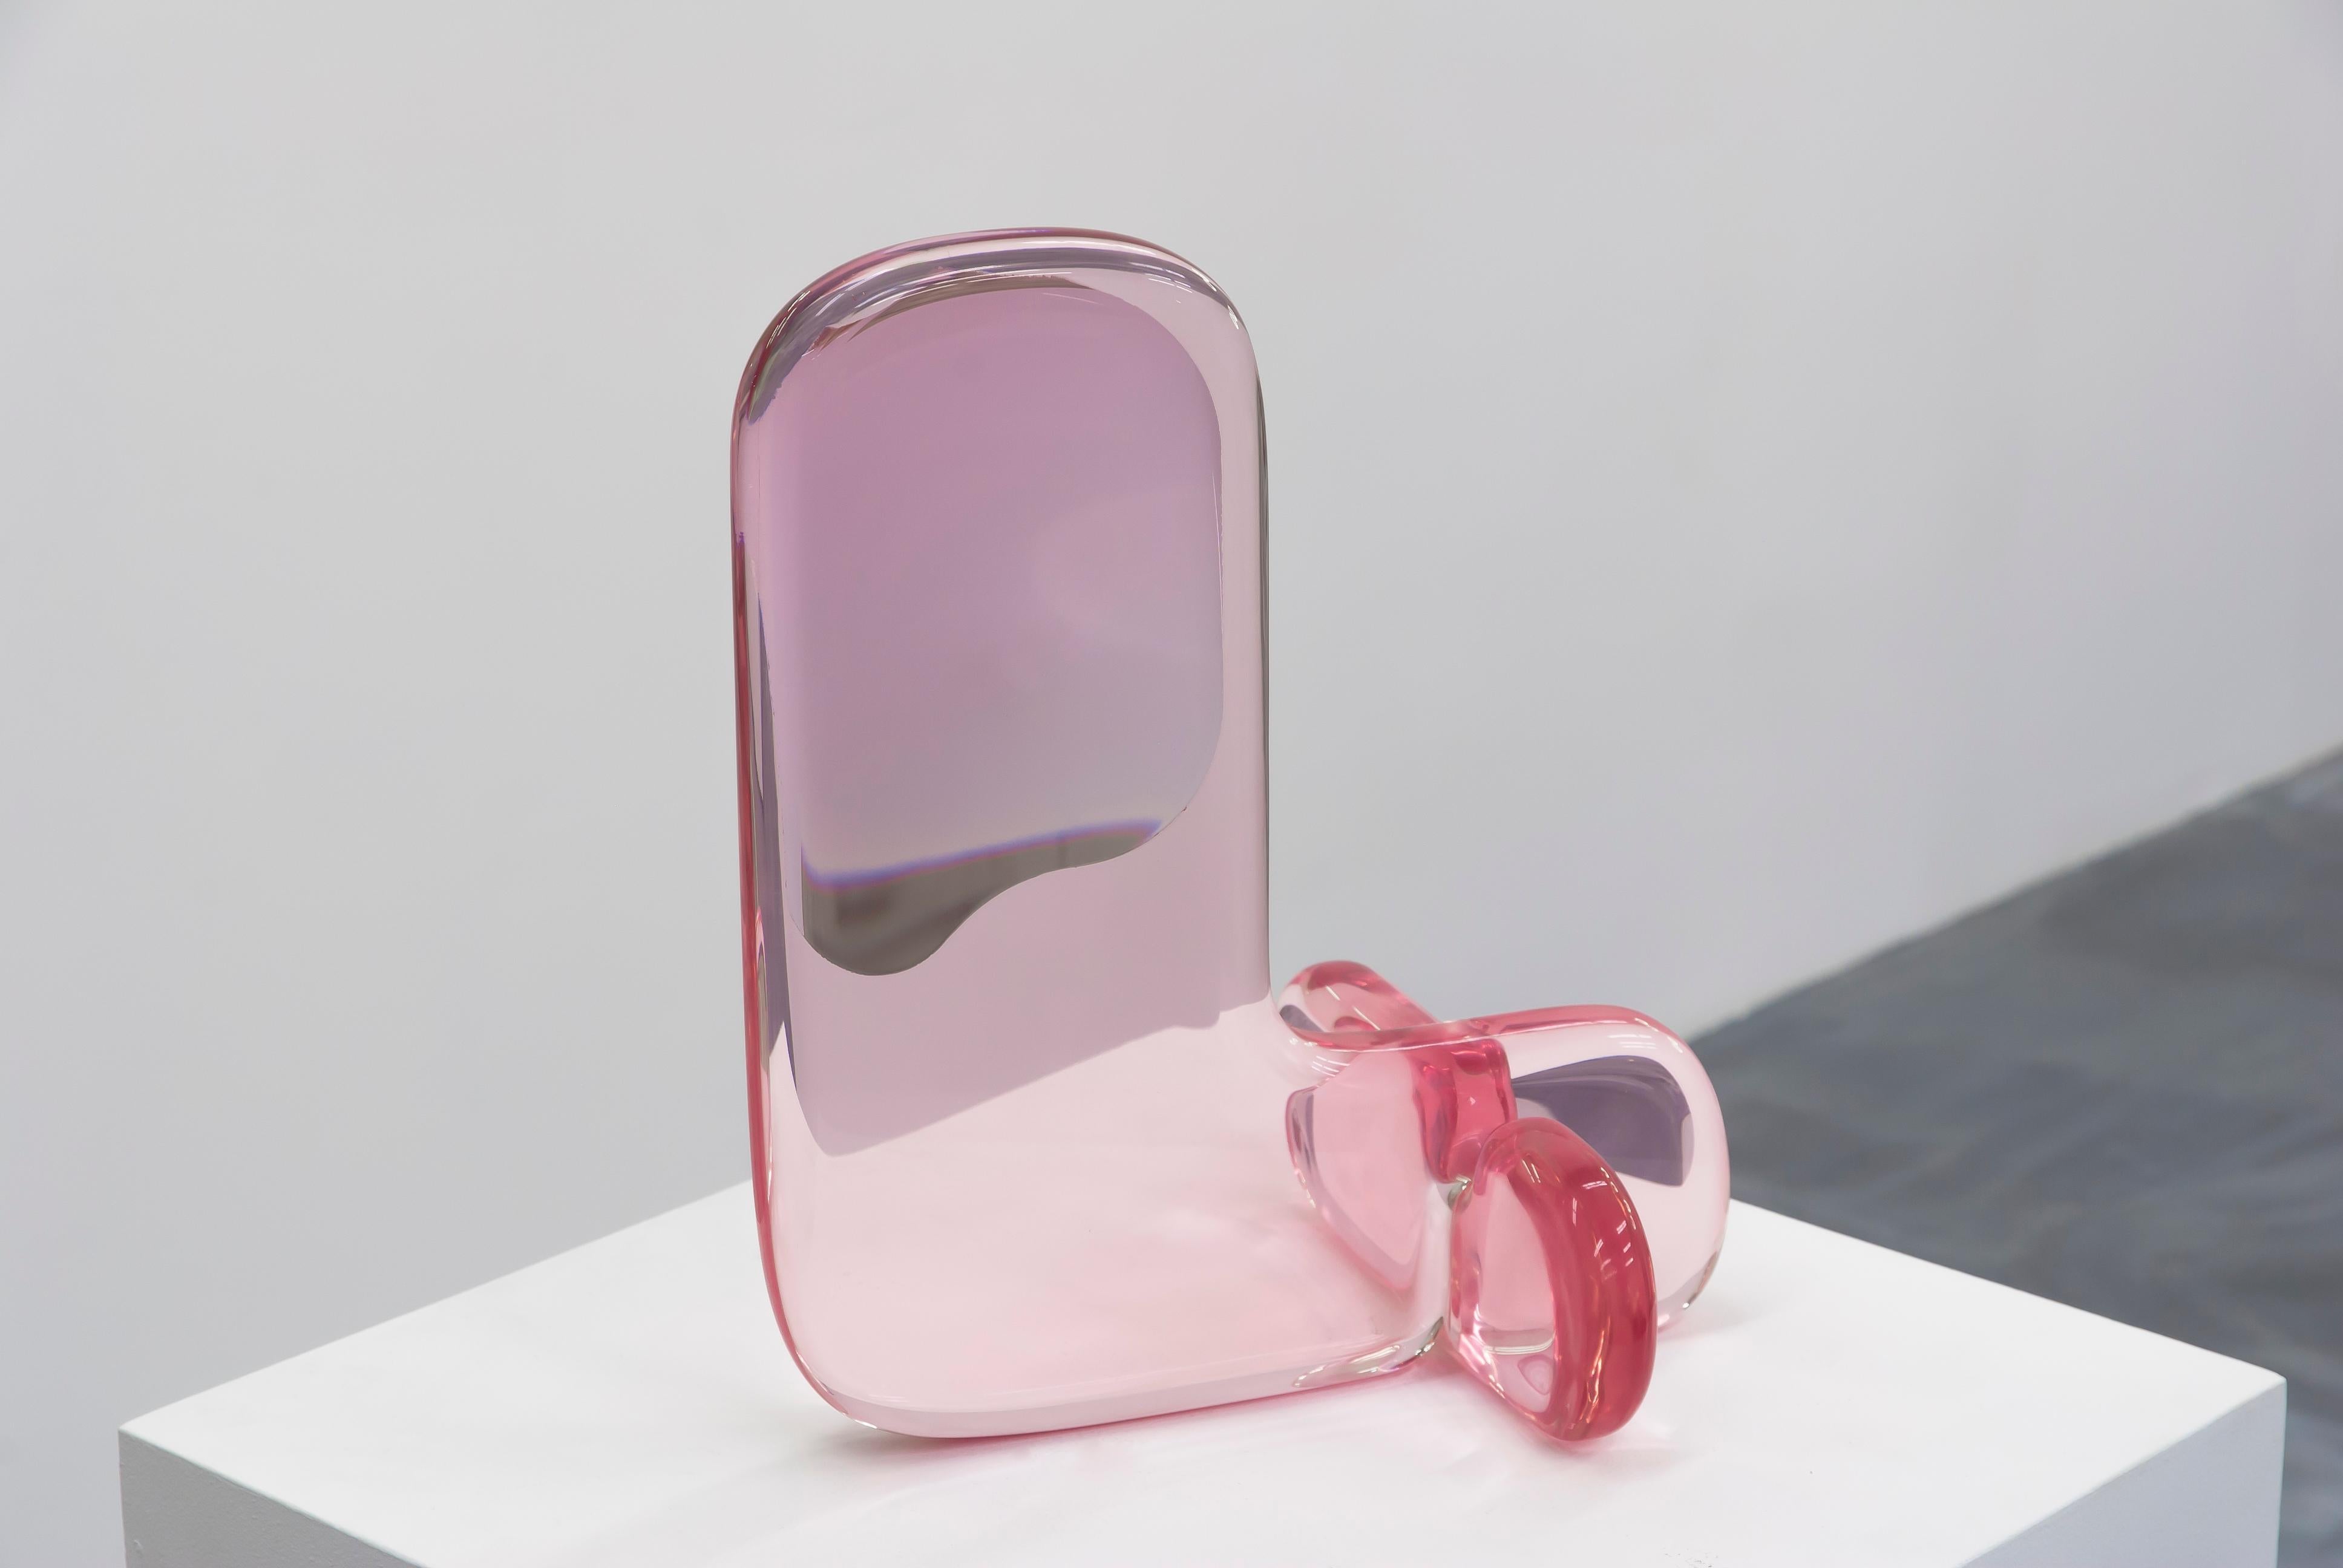 First debuted at the 1st Dibs Chelsea Gallery for the 4th edition of the quarterly exhibition entitled “Object Permanence”.

This little mirror is a continuation the Plump series of sculptural furniture. The shapes play upon the effect that resin